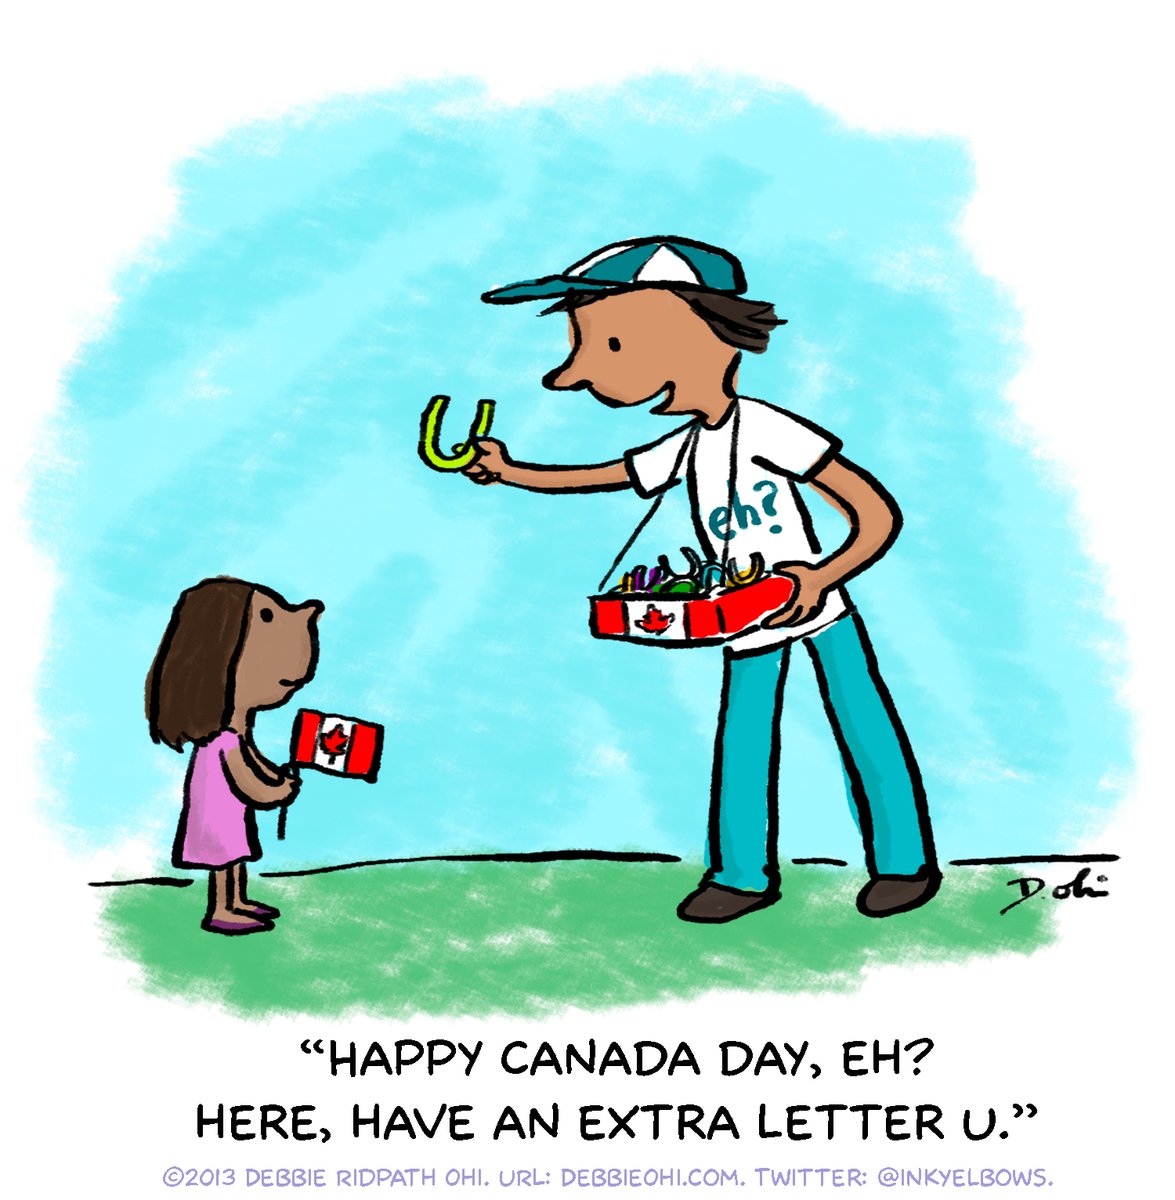 Even if you're not Canadian, you can help celebrate #IReadCanadian Day on Feb. 19, 2020 by reading a Canadian children's book for 15 min! Details: ireadcanadian.com/day/

I'm compiling a list of fellow #CanKidLit book creators 🇨🇦:  twitter.com/inkyelbows/lis…